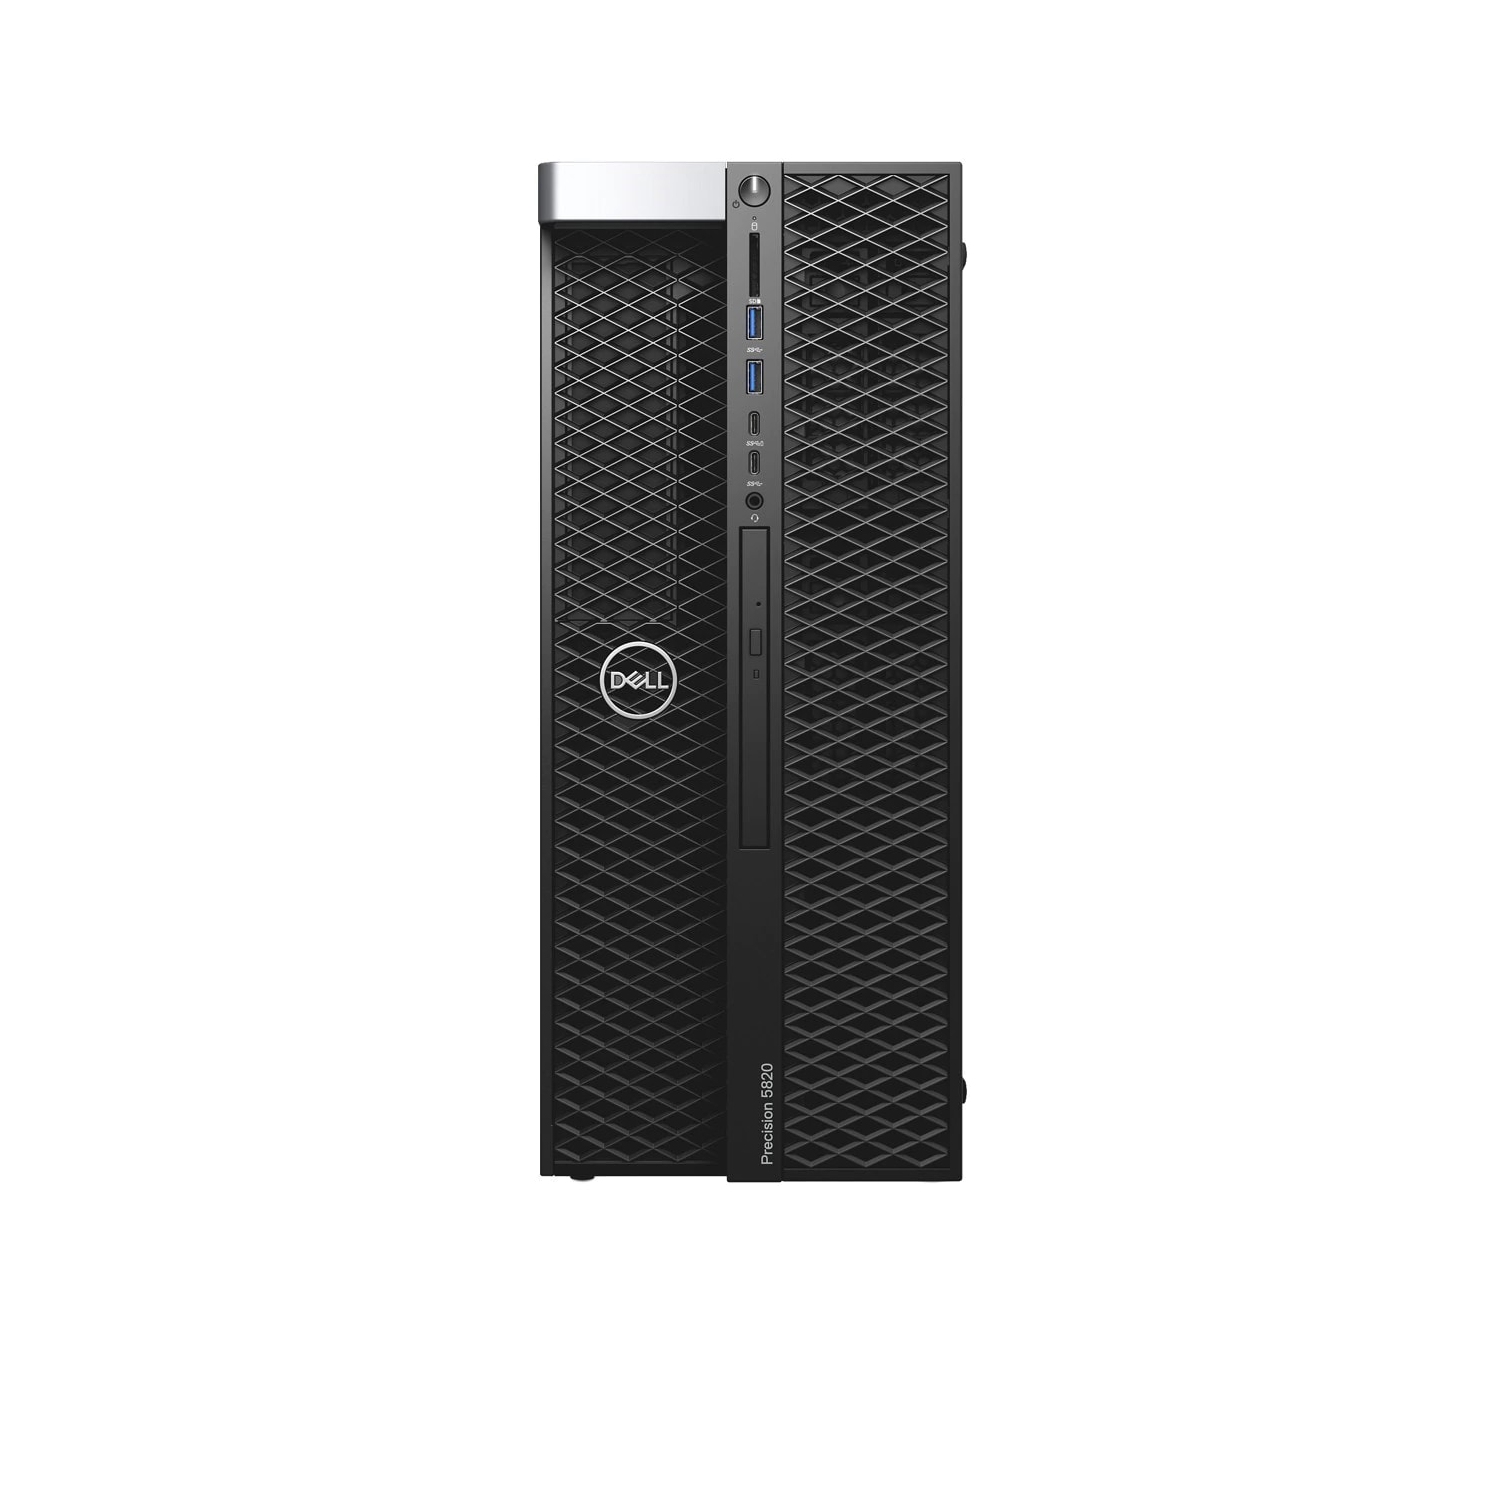 Refurbished (Excellent) - Dell Precision T5820 Workstation Desktop (2018), Core i9, 2TB SSD + 2TB HDD, 32GB RAM, RTX 5000, 10 Cores @ 4.5 GHz, 10th Gen CPU Certified